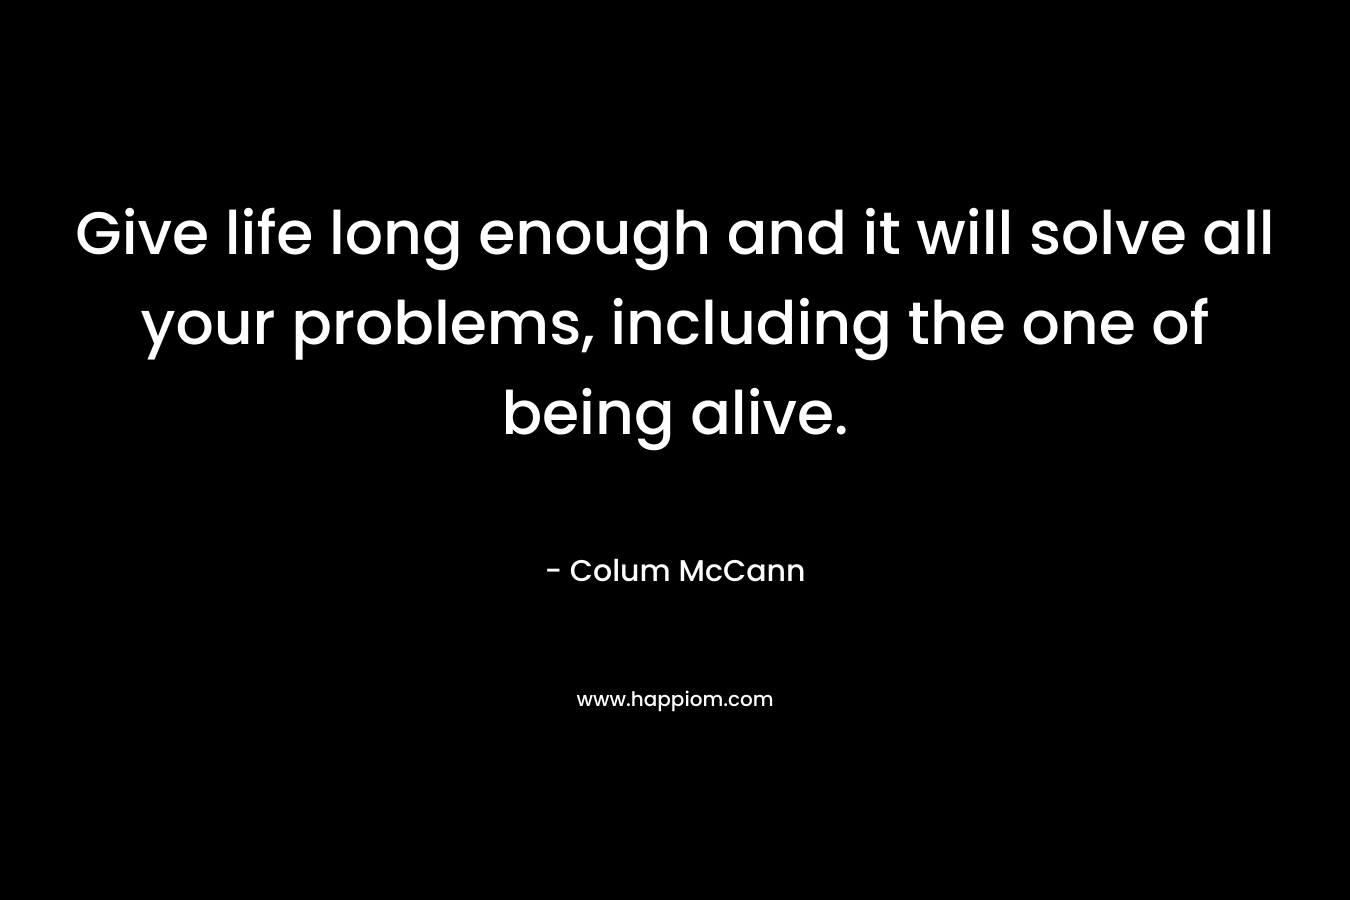 Give life long enough and it will solve all your problems, including the one of being alive.